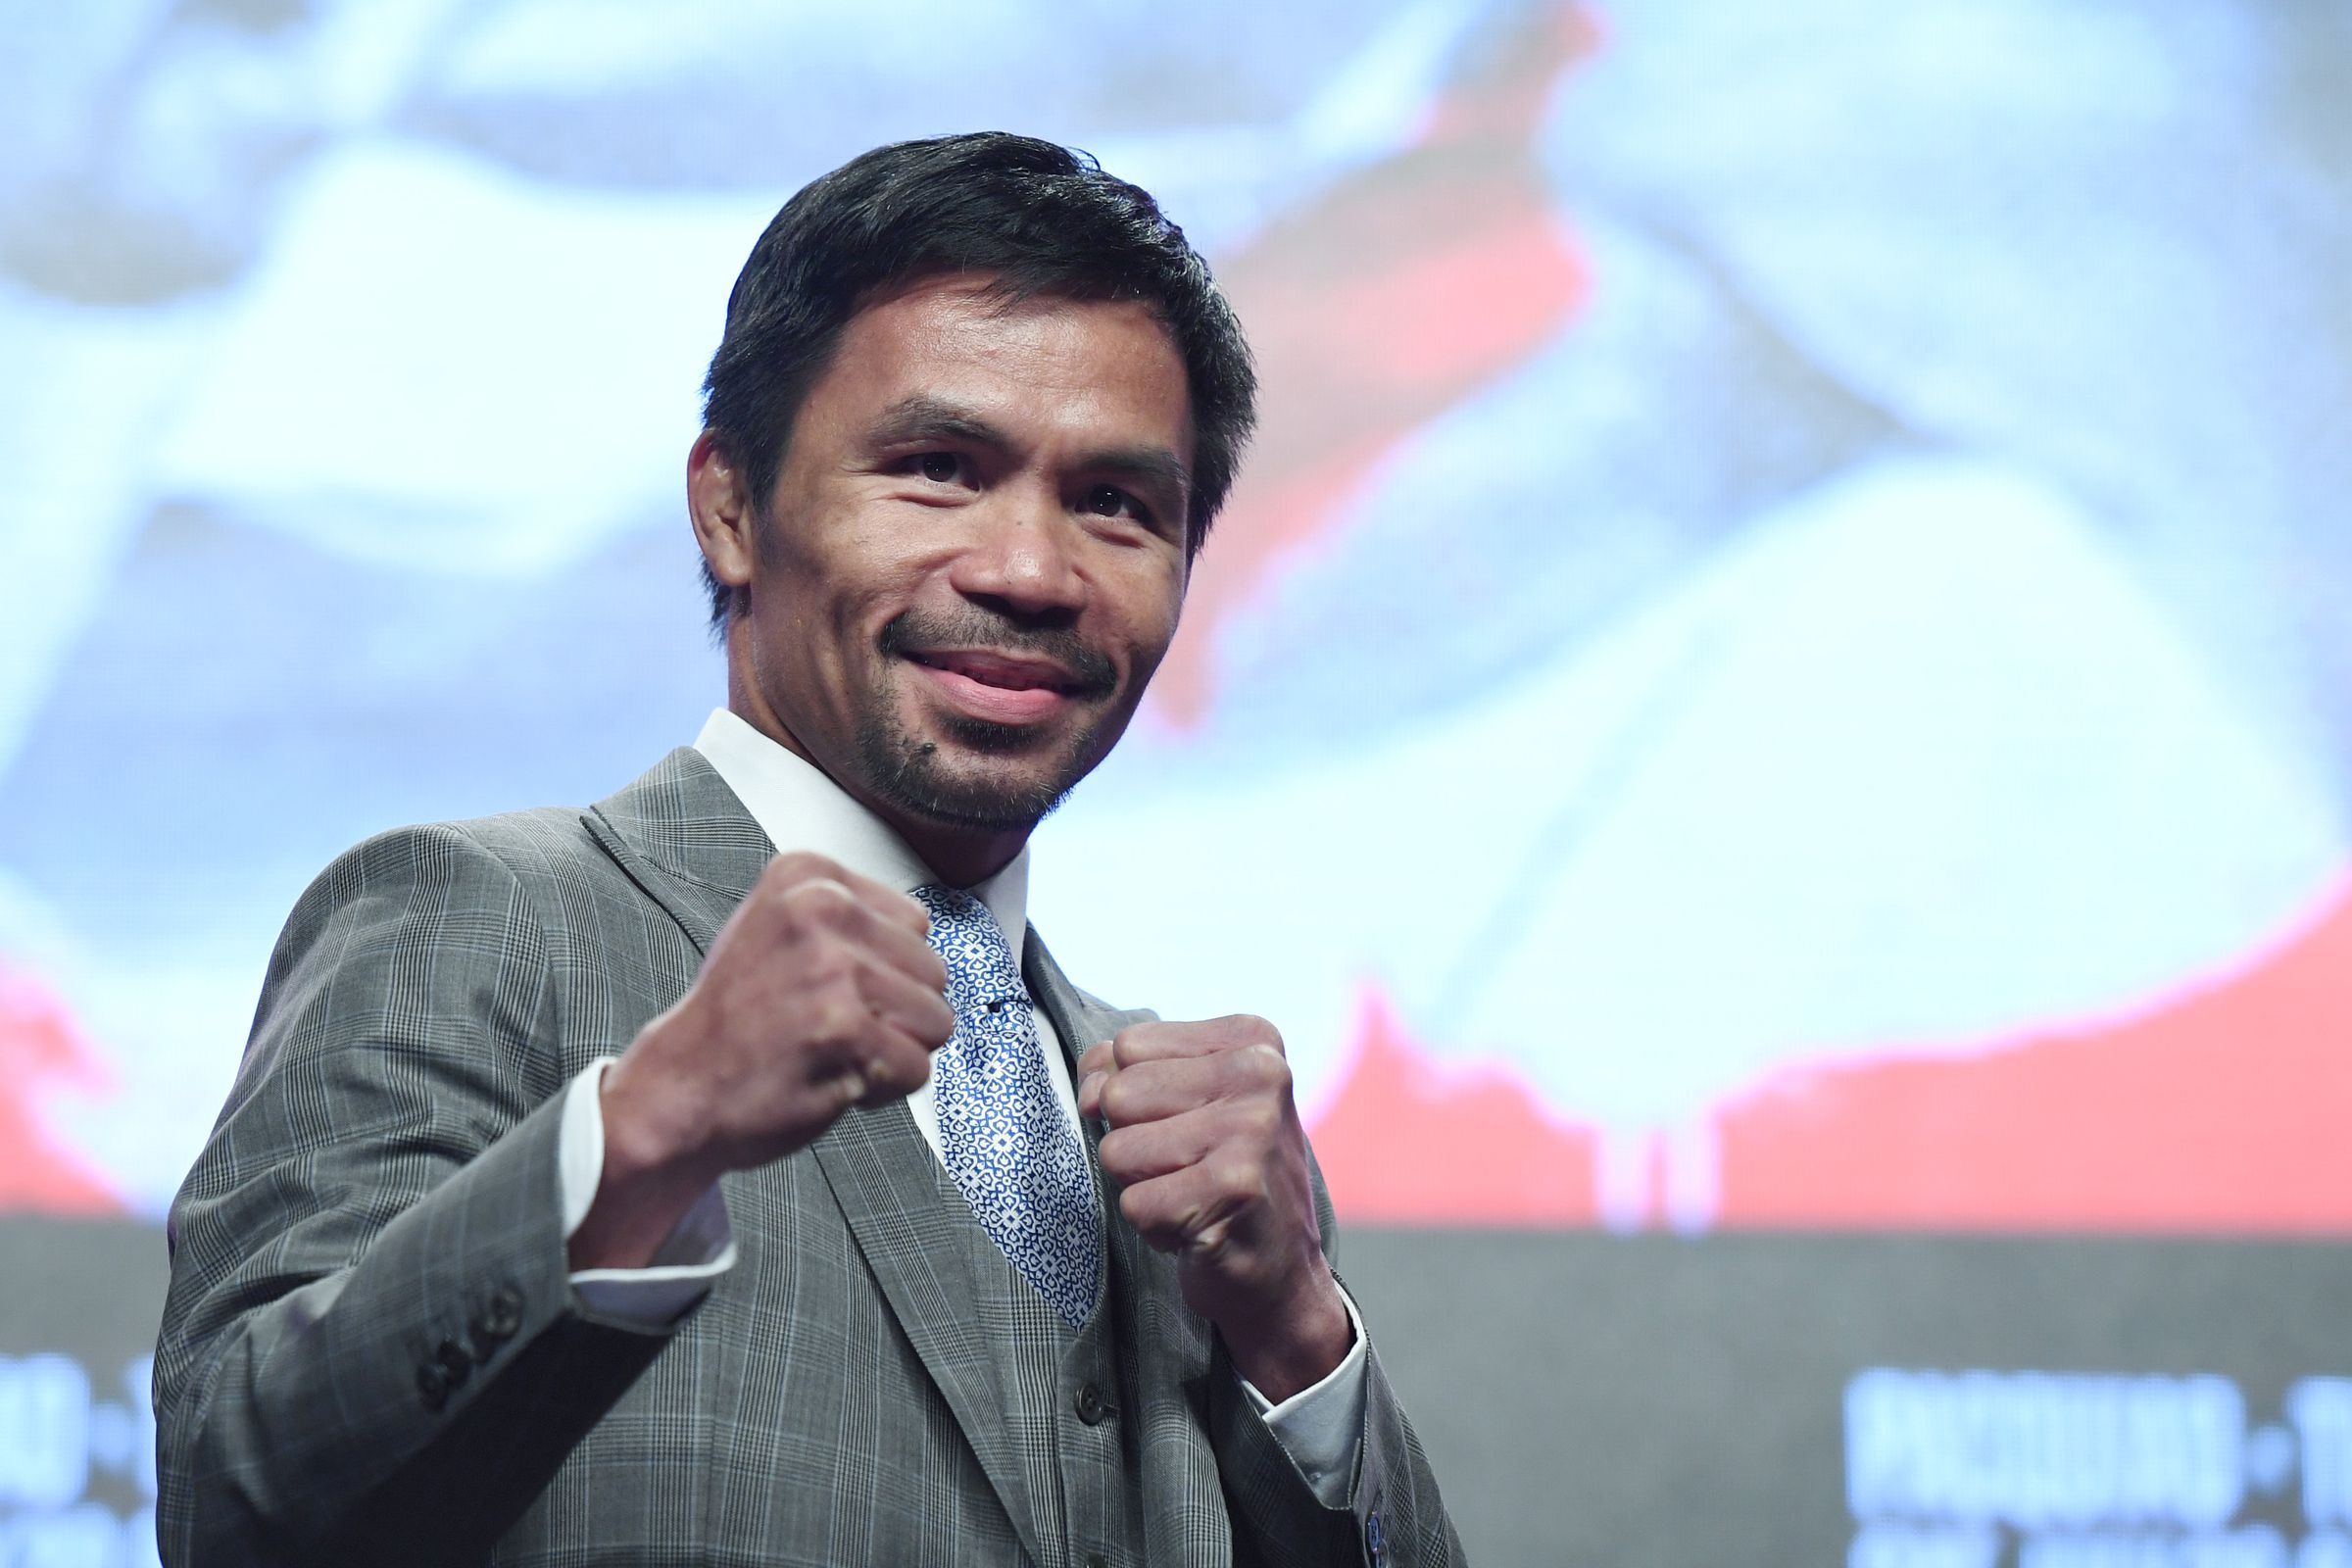 Manny Pacquiao poses with raised fists wearing a gray wool suit.